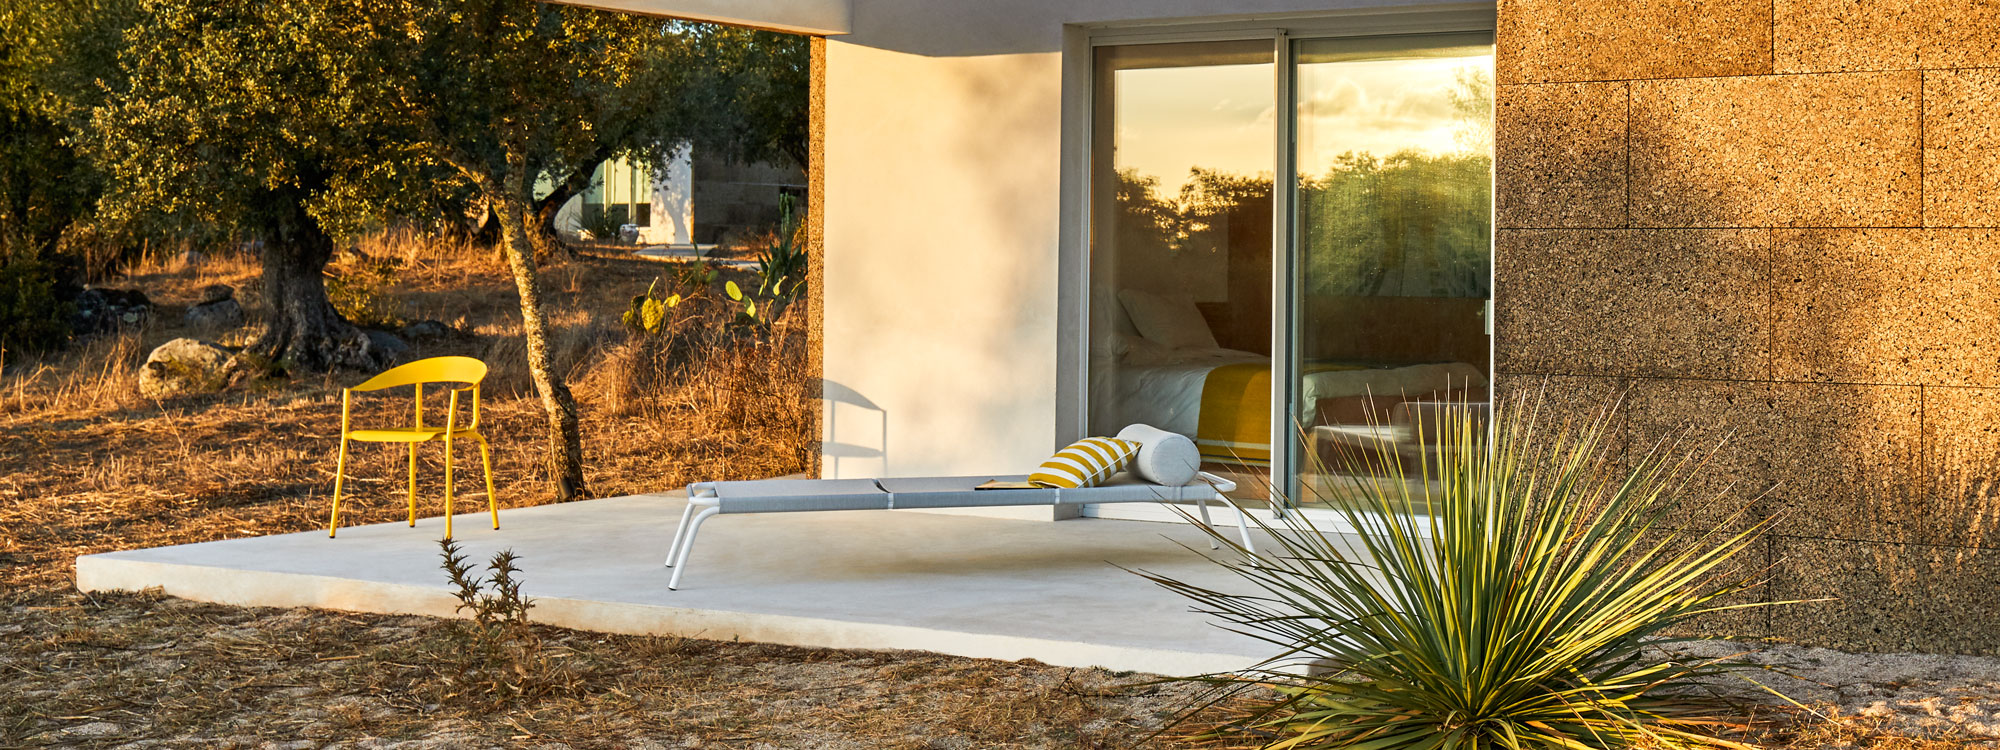 Genua modern sun bed is a designer sun lounger in luxury outdoor furniture materials by Mark Braun for Conmoto garden furniture company.